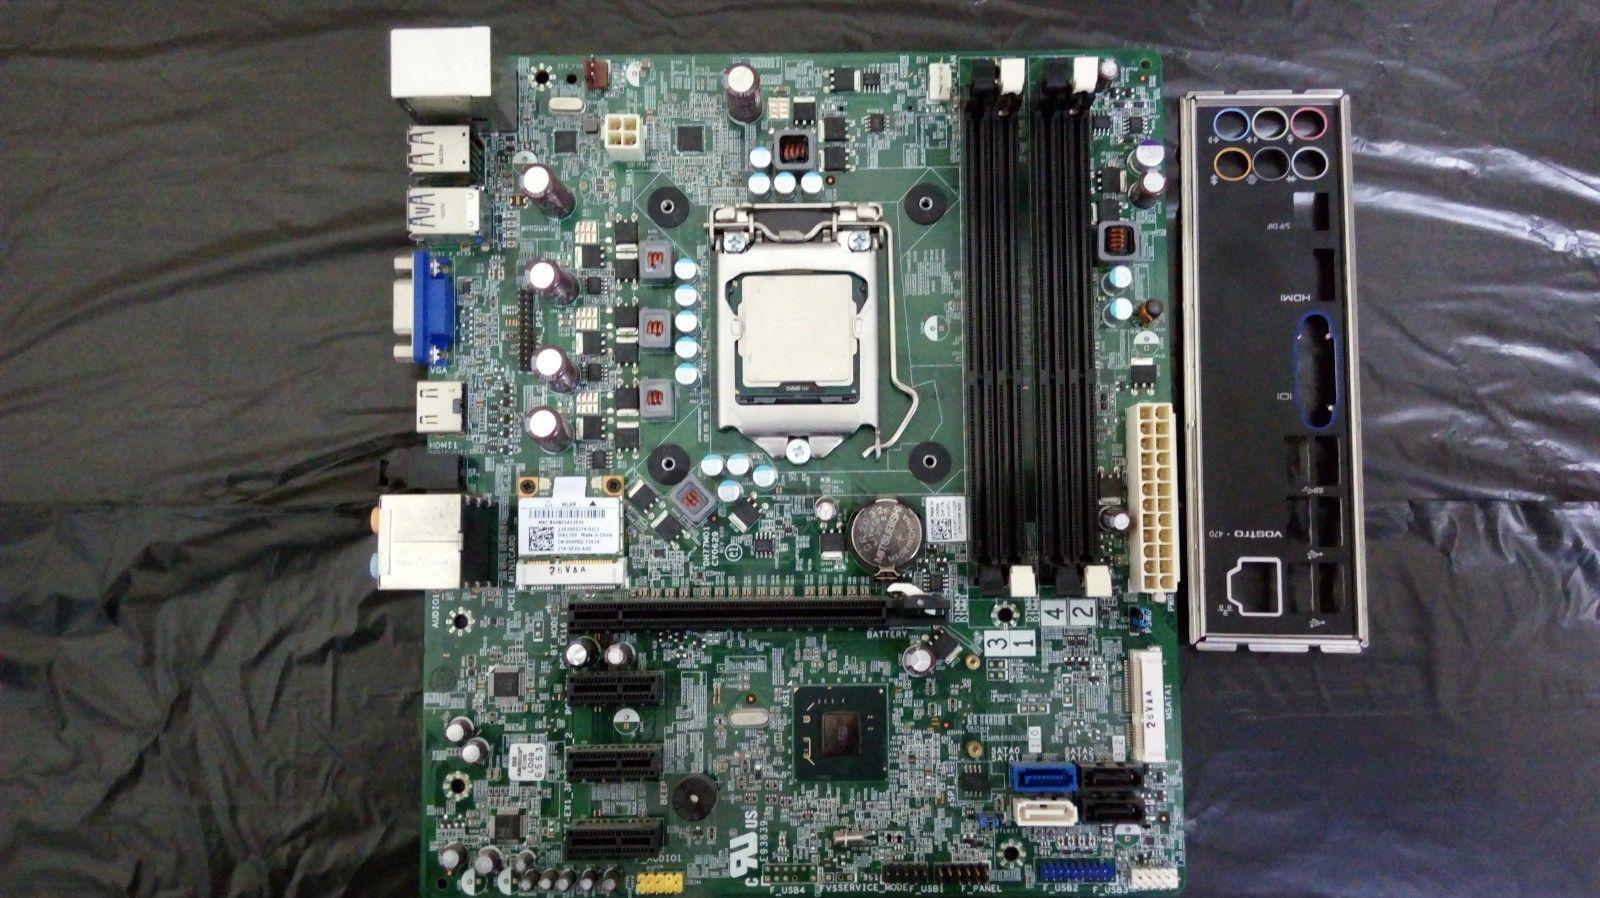 Dell motherboard studio xps 8500 intel Dh77m01 CY0629.+cpu i7 3770